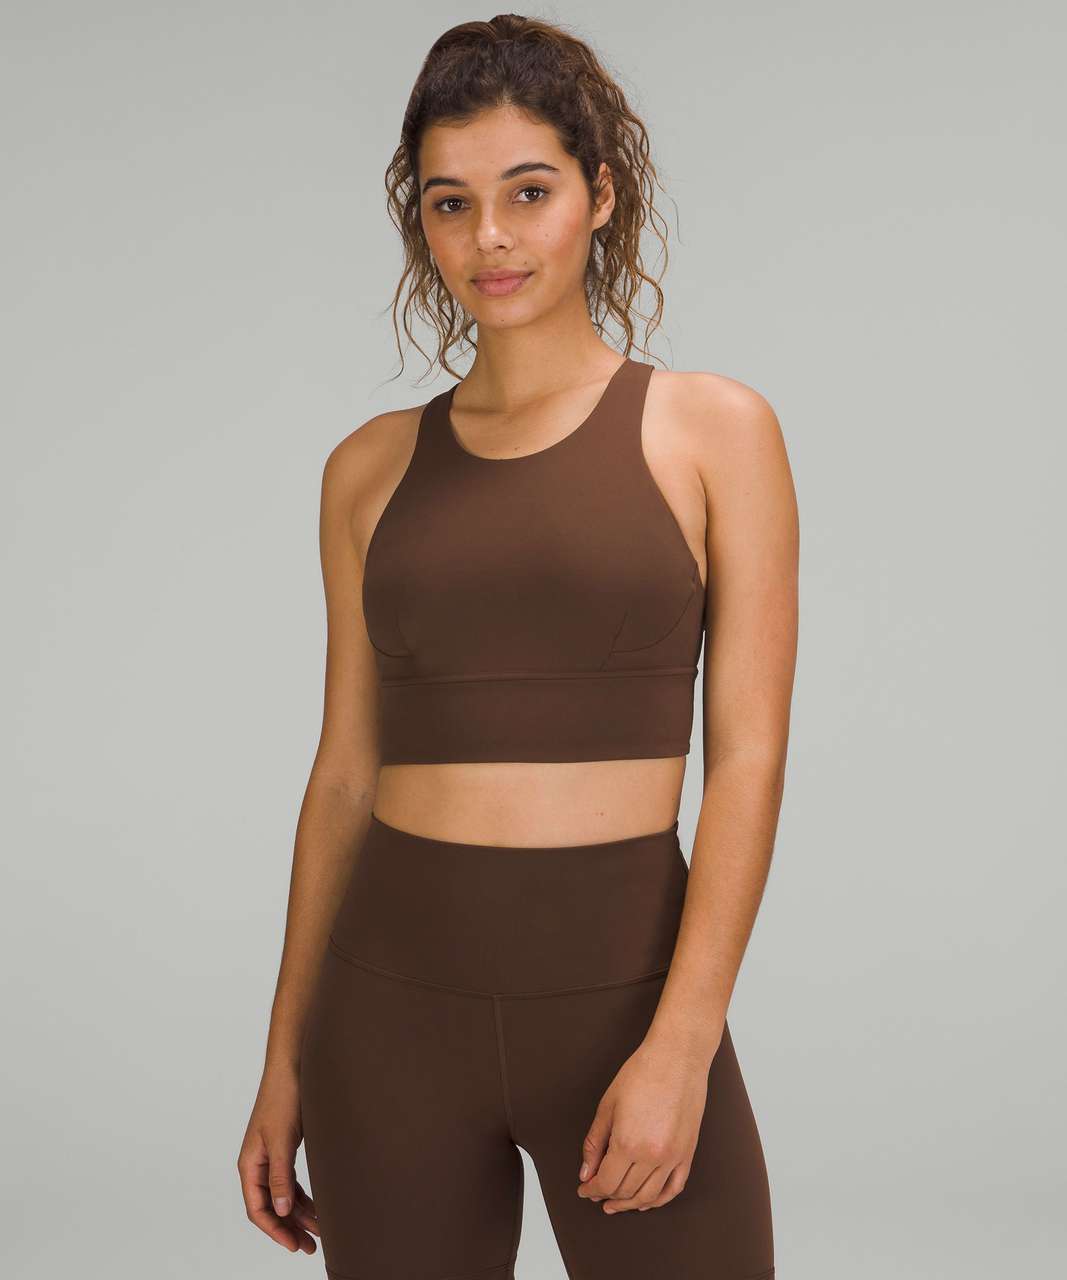 Lululemon's ultra popular Align Bra finally comes in C/D cup sizes